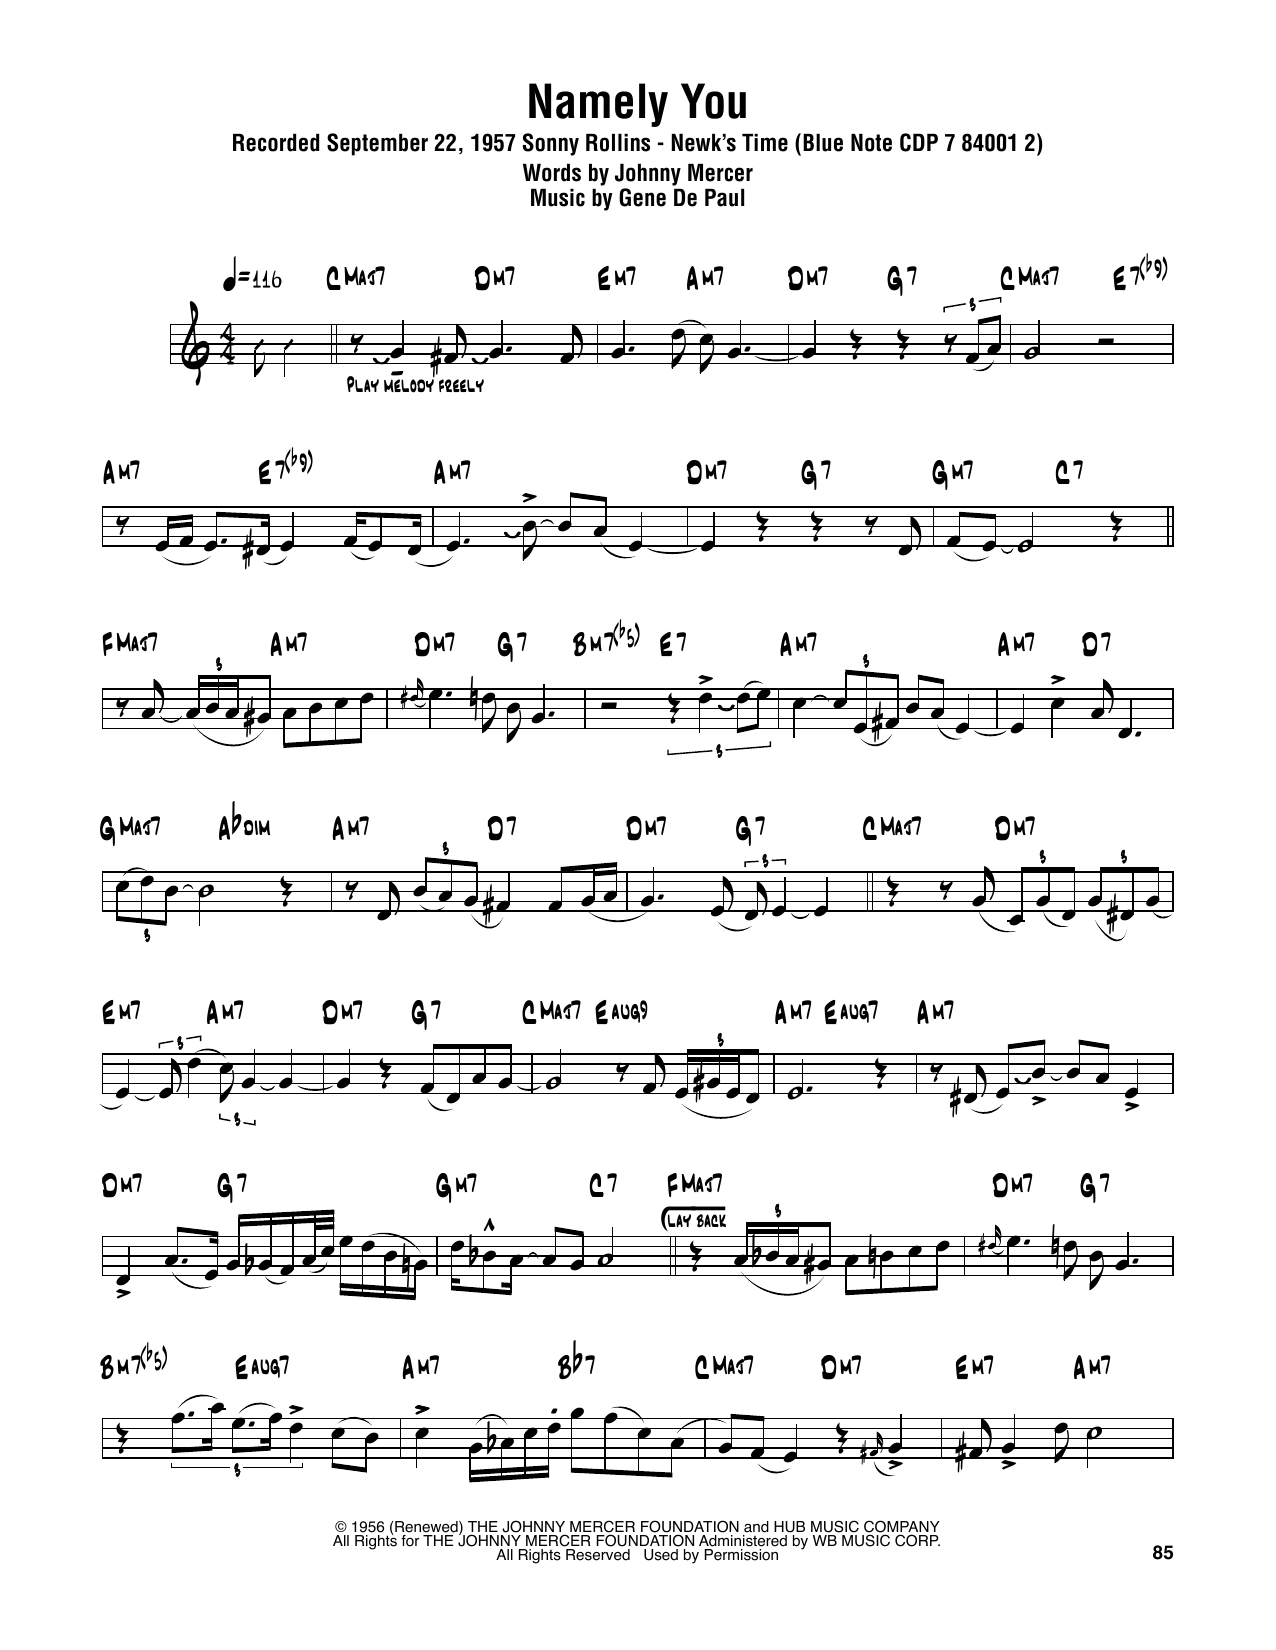 Download Sonny Rollins Namely You Sheet Music